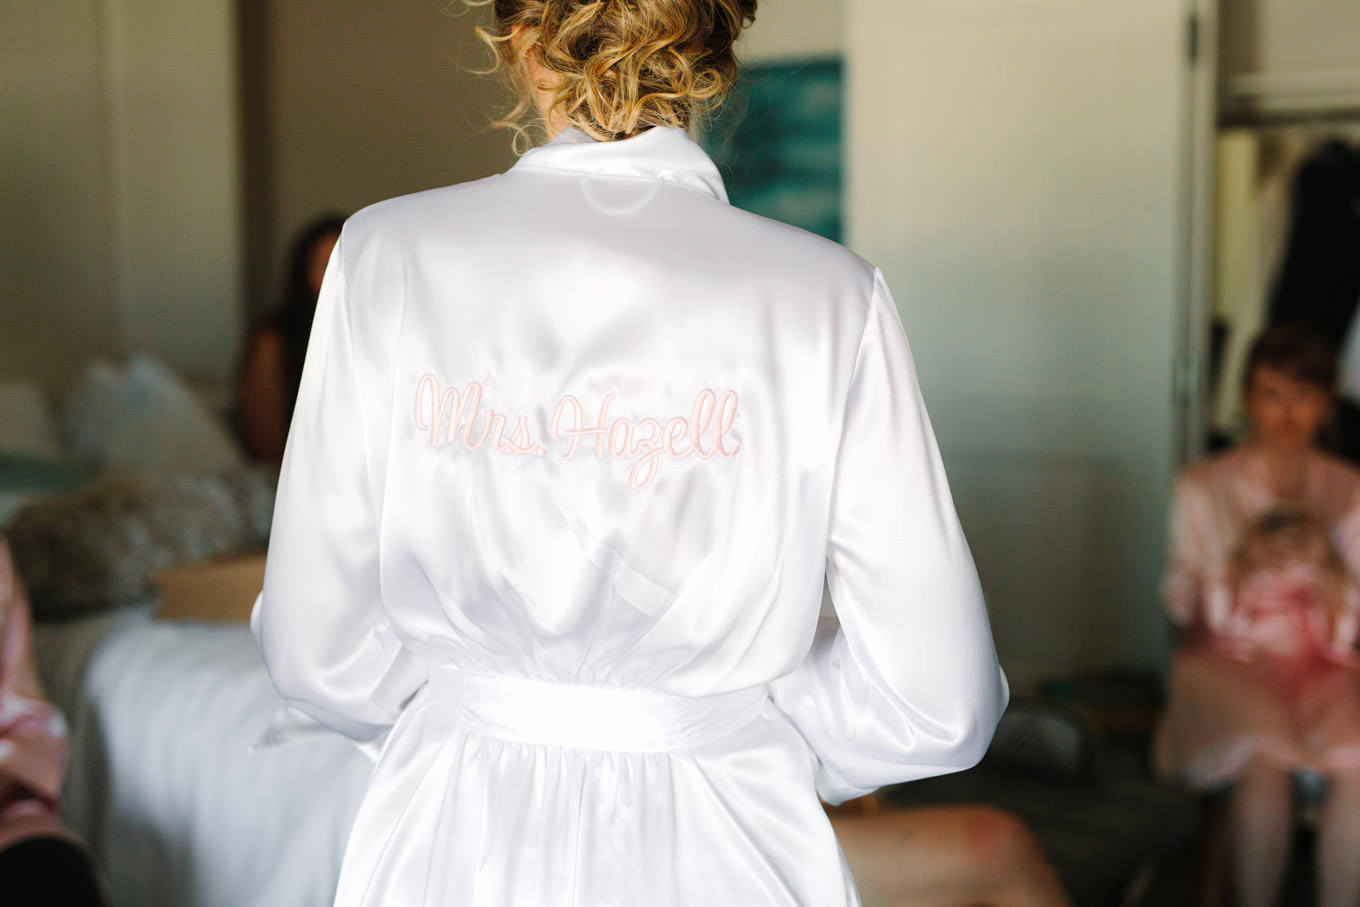 Bridal robe detail | Living Desert Zoo & Gardens wedding with unique details | Elevated and colorful wedding photography for fun-loving couples in Southern California |  #PalmSprings #palmspringsphotographer #gardenwedding #palmspringswedding  Source: Mary Costa Photography | Los Angeles wedding photographer 